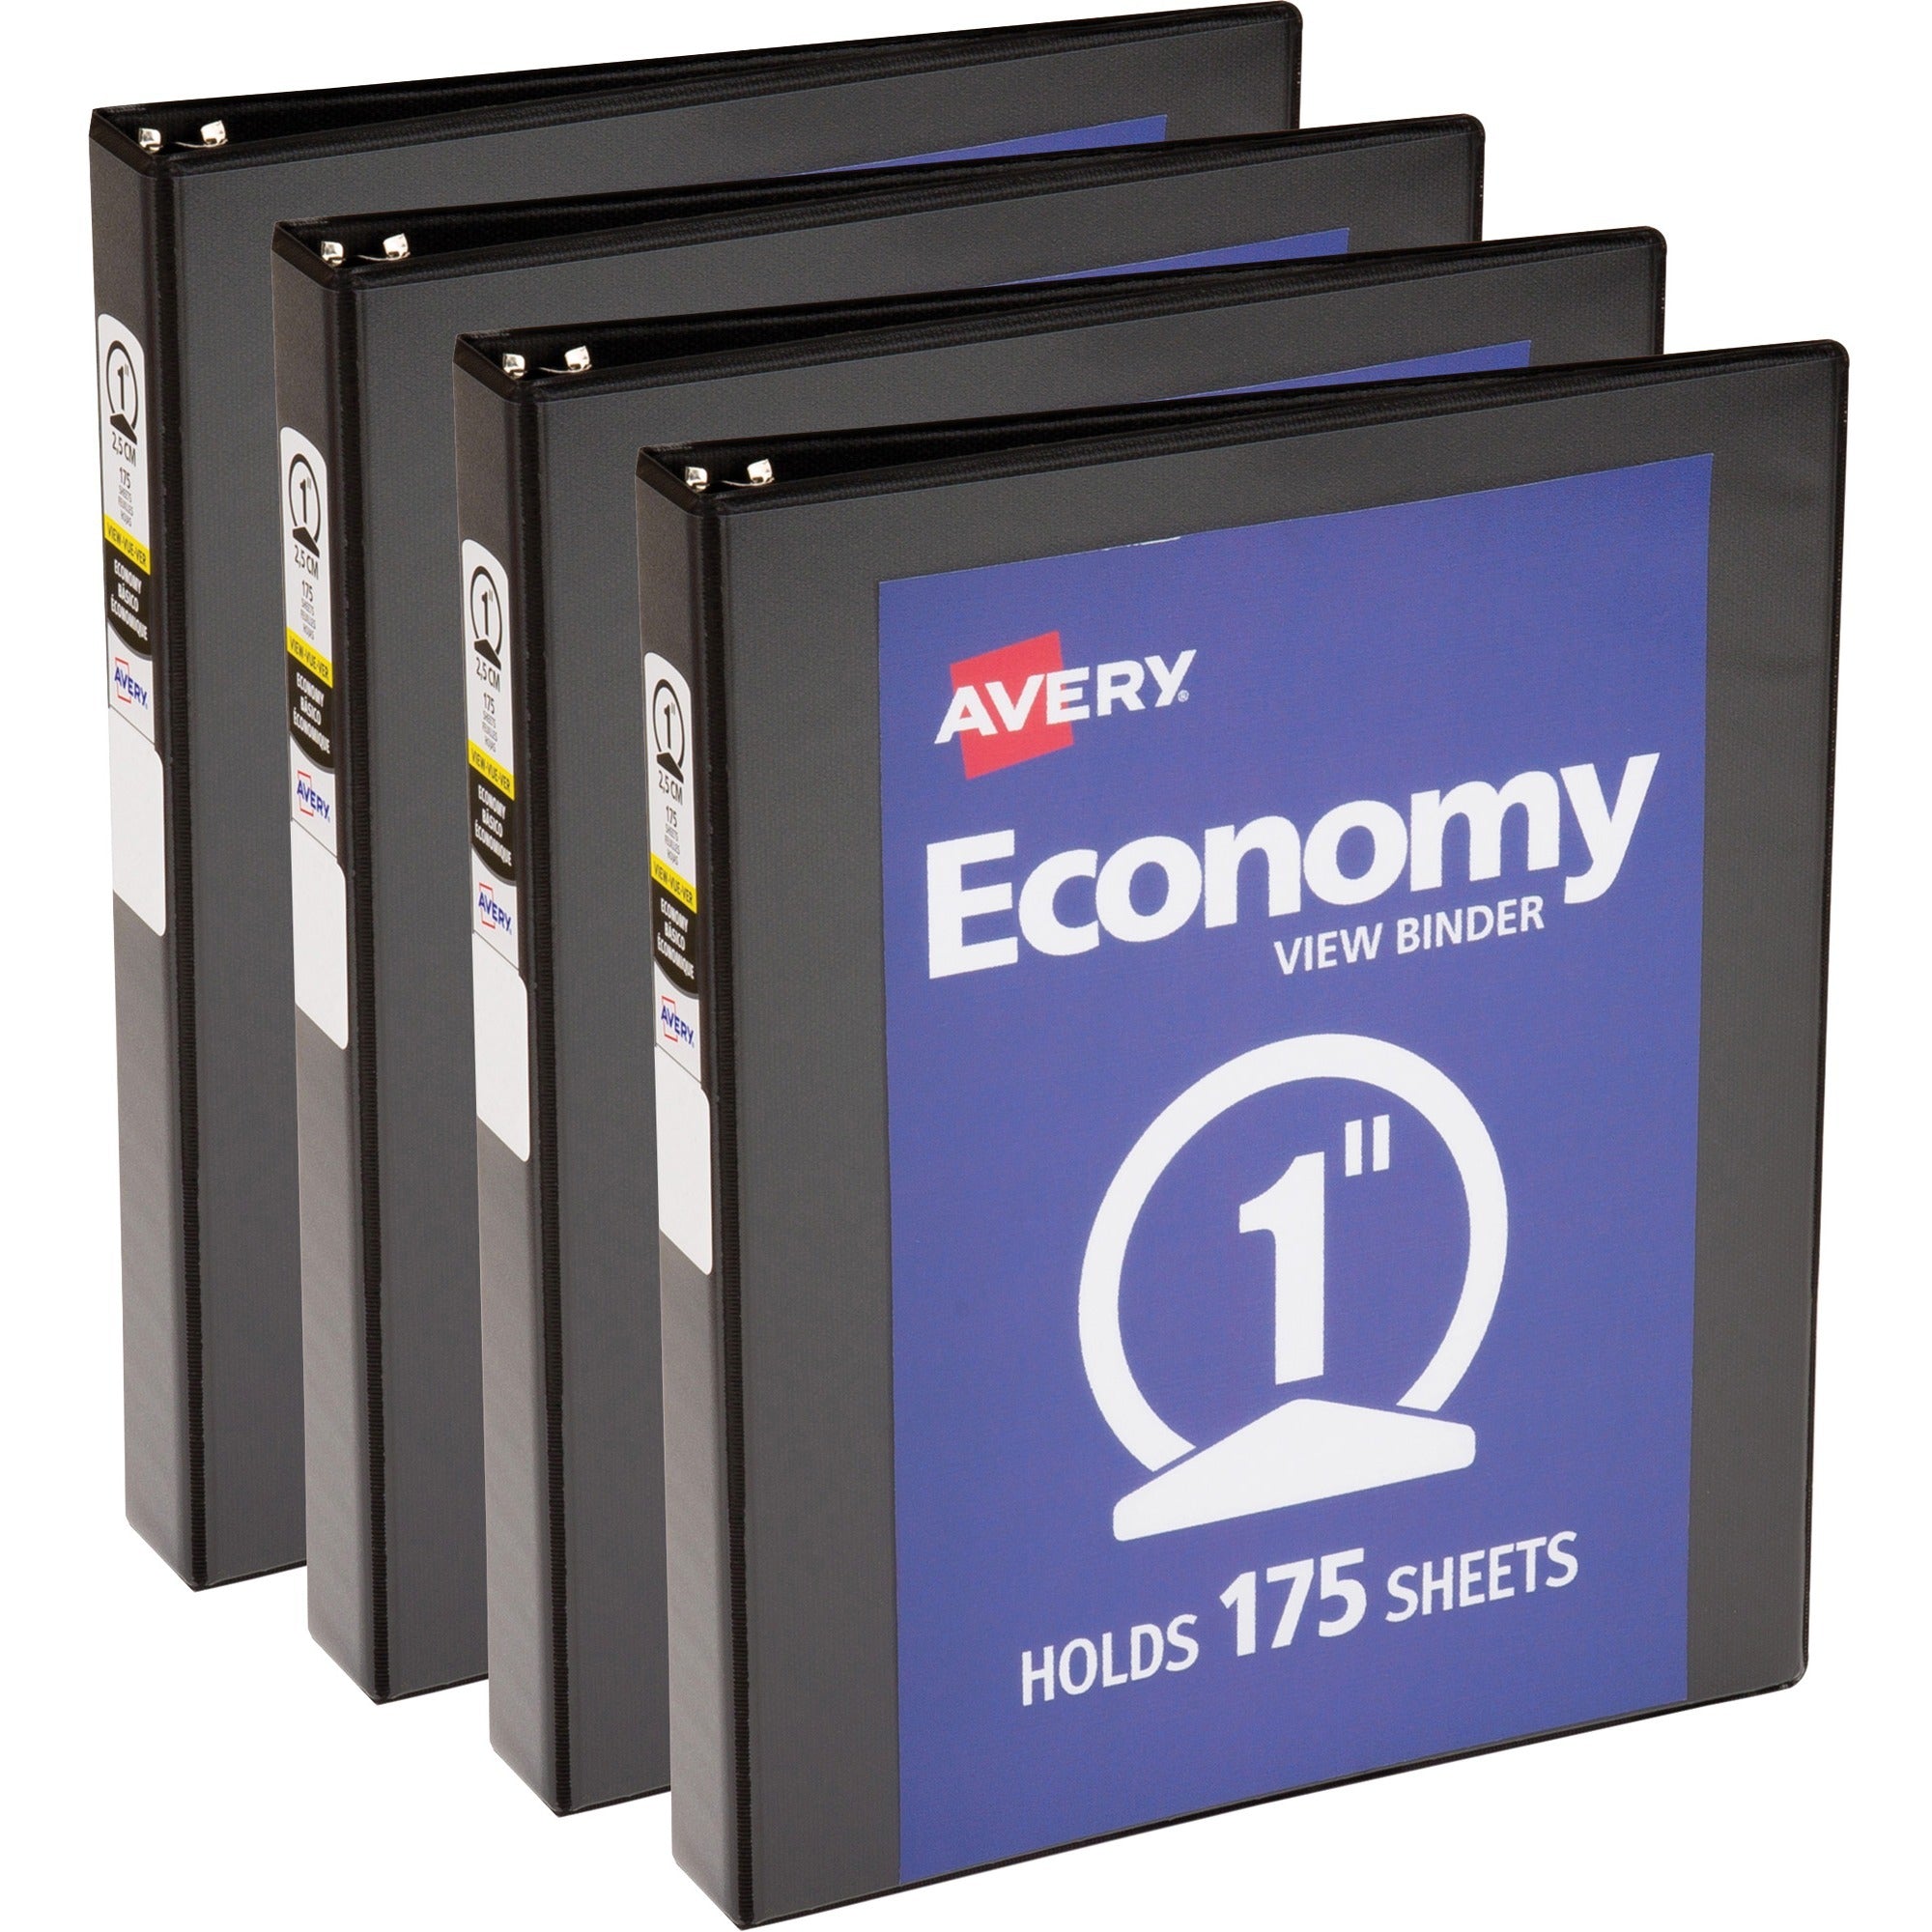 avery-economy-view-binder_ave05710bd - 1